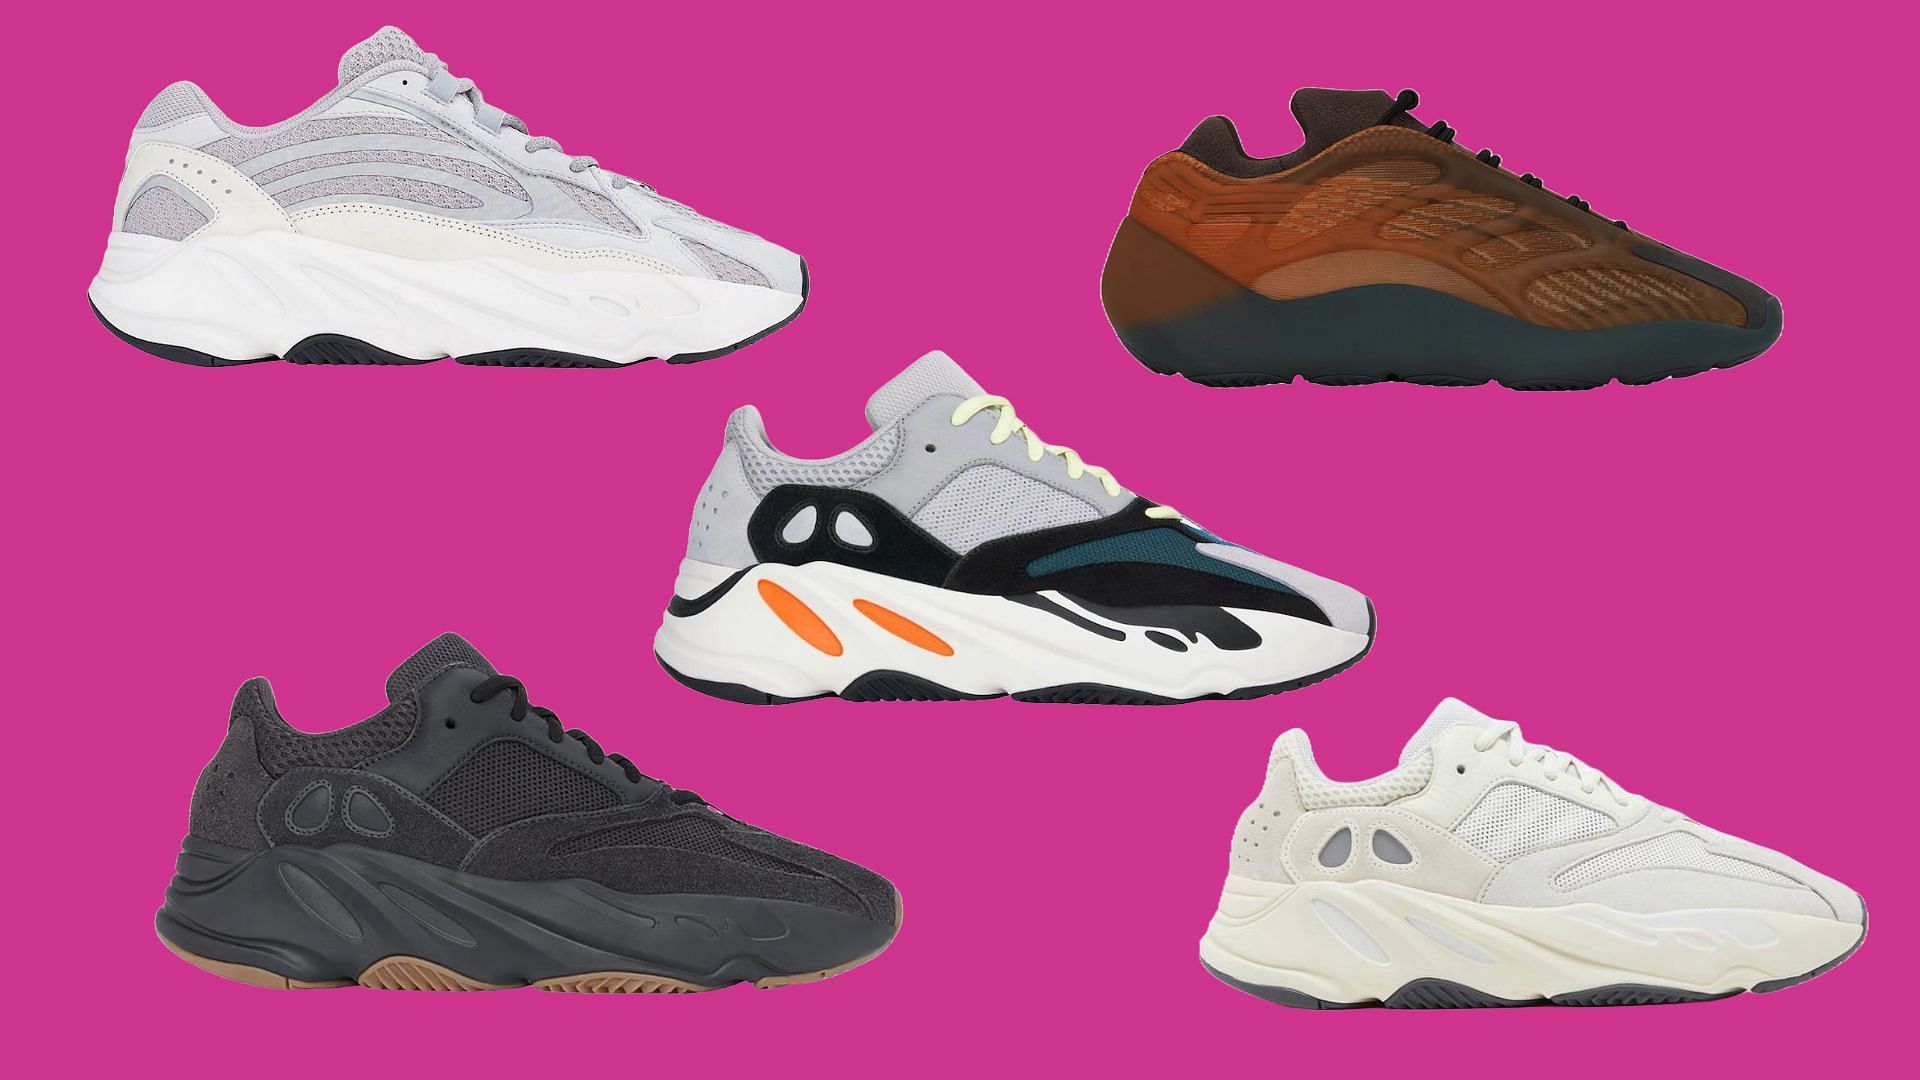 Five exciting colorways of Adidas Yeezy 700 restocked in August 2023